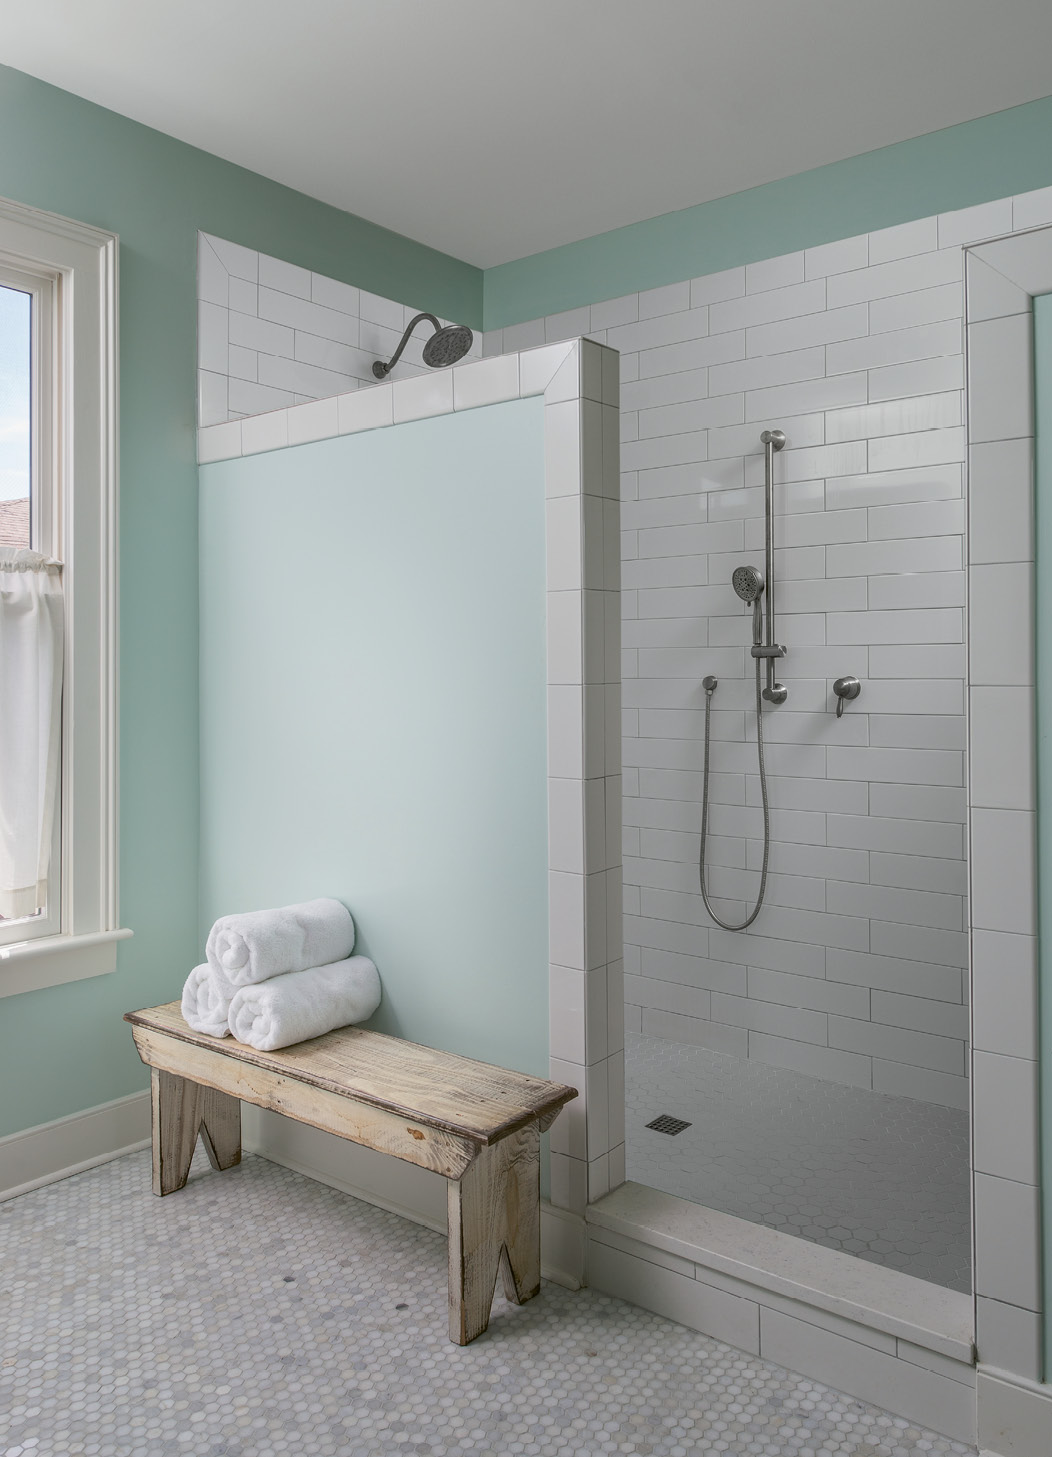 A tiled shower with no glass door makes the bath low-maintenance. “The design is a result of me hating to clean glass doors; I never wanted to see another squeegee again!” Cindy laughs.